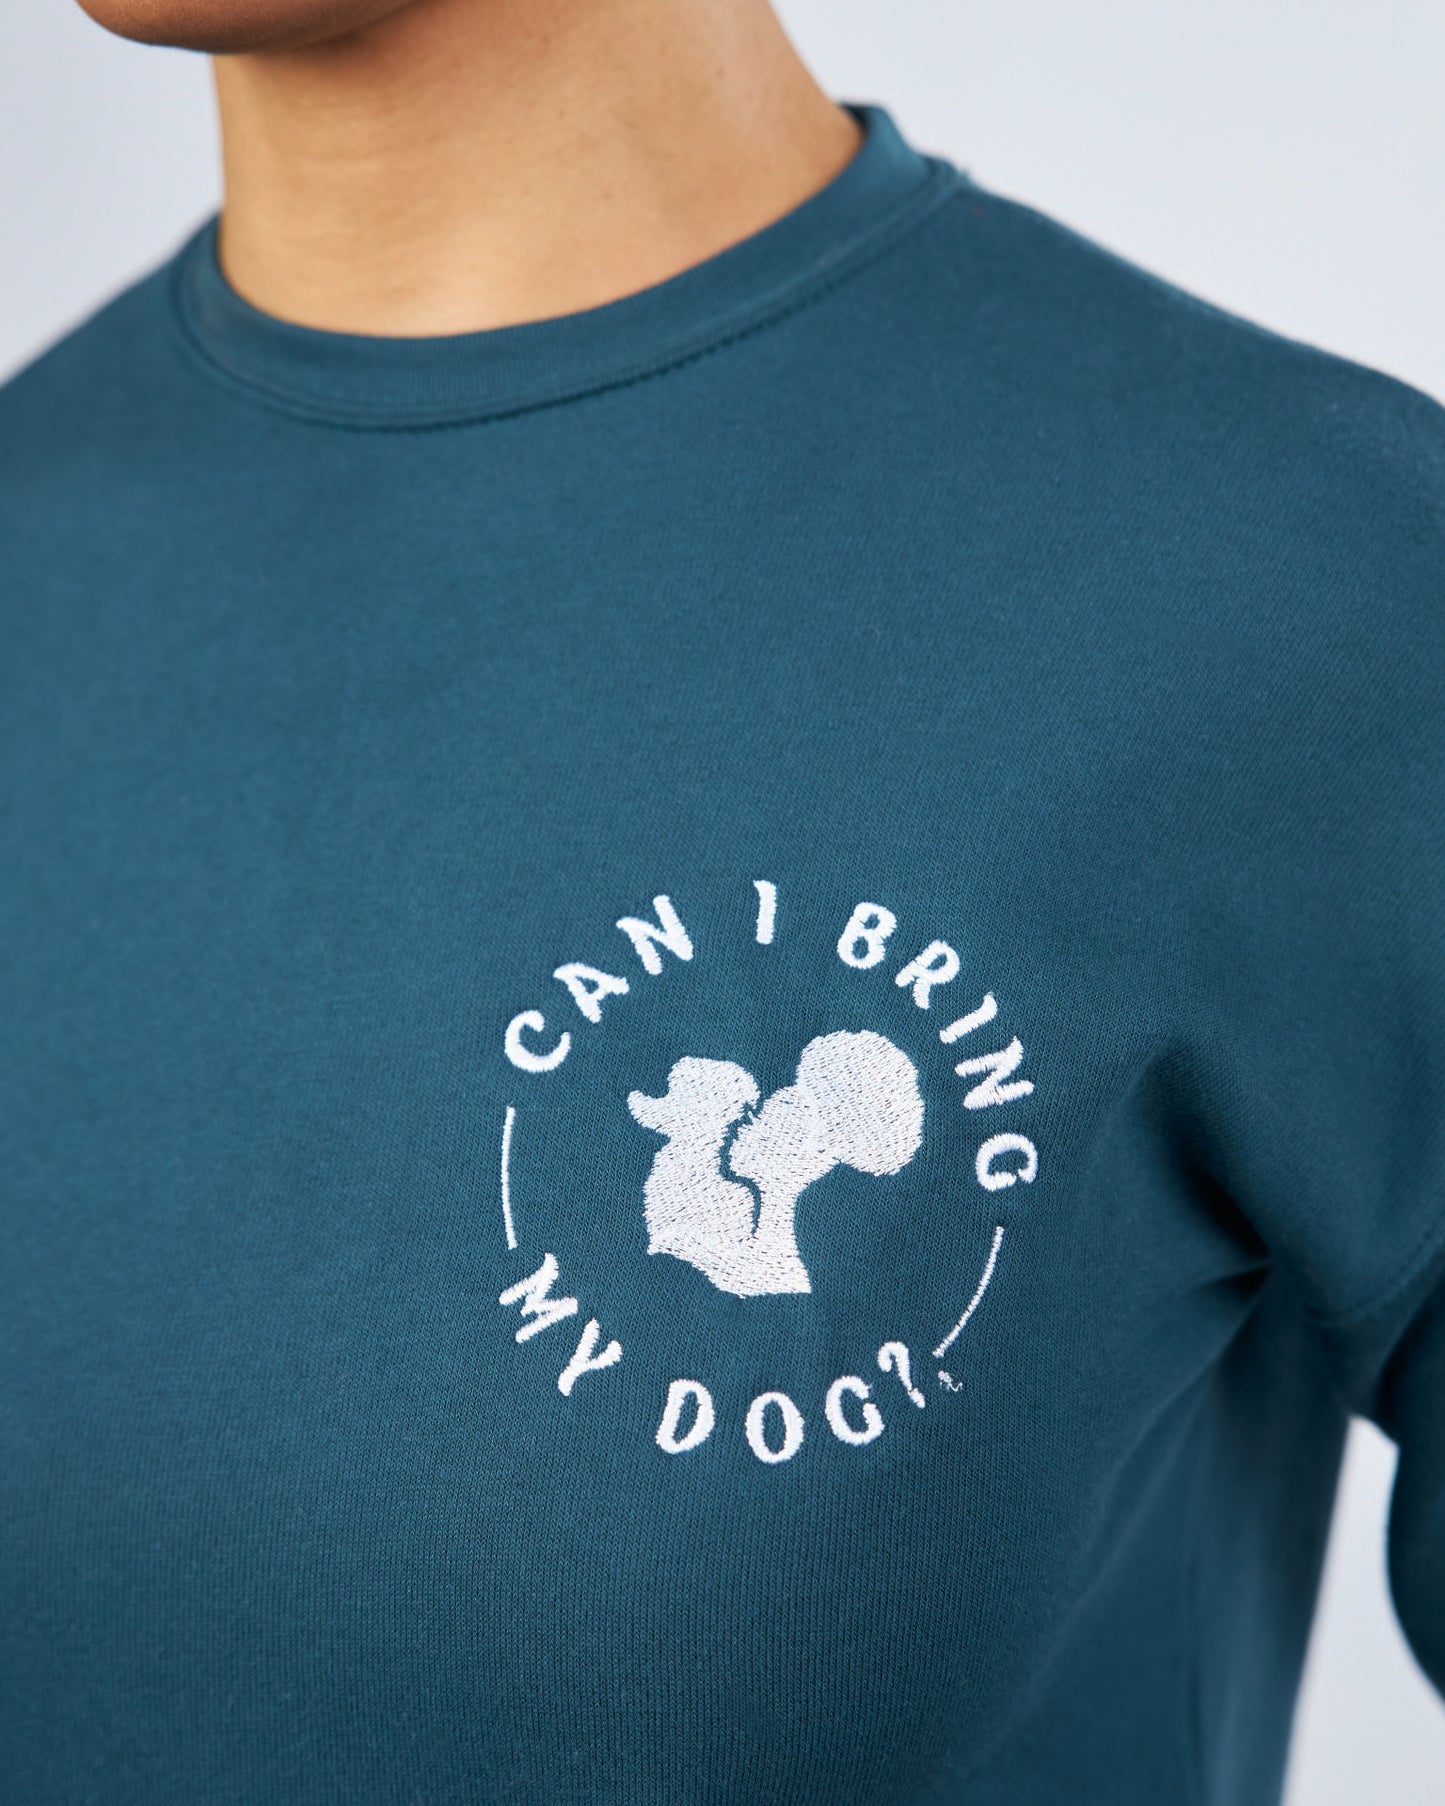 Embroidered "Can I Bring My Dog?" - Black Woman Silhouette - Crew Neck Sweatshirt